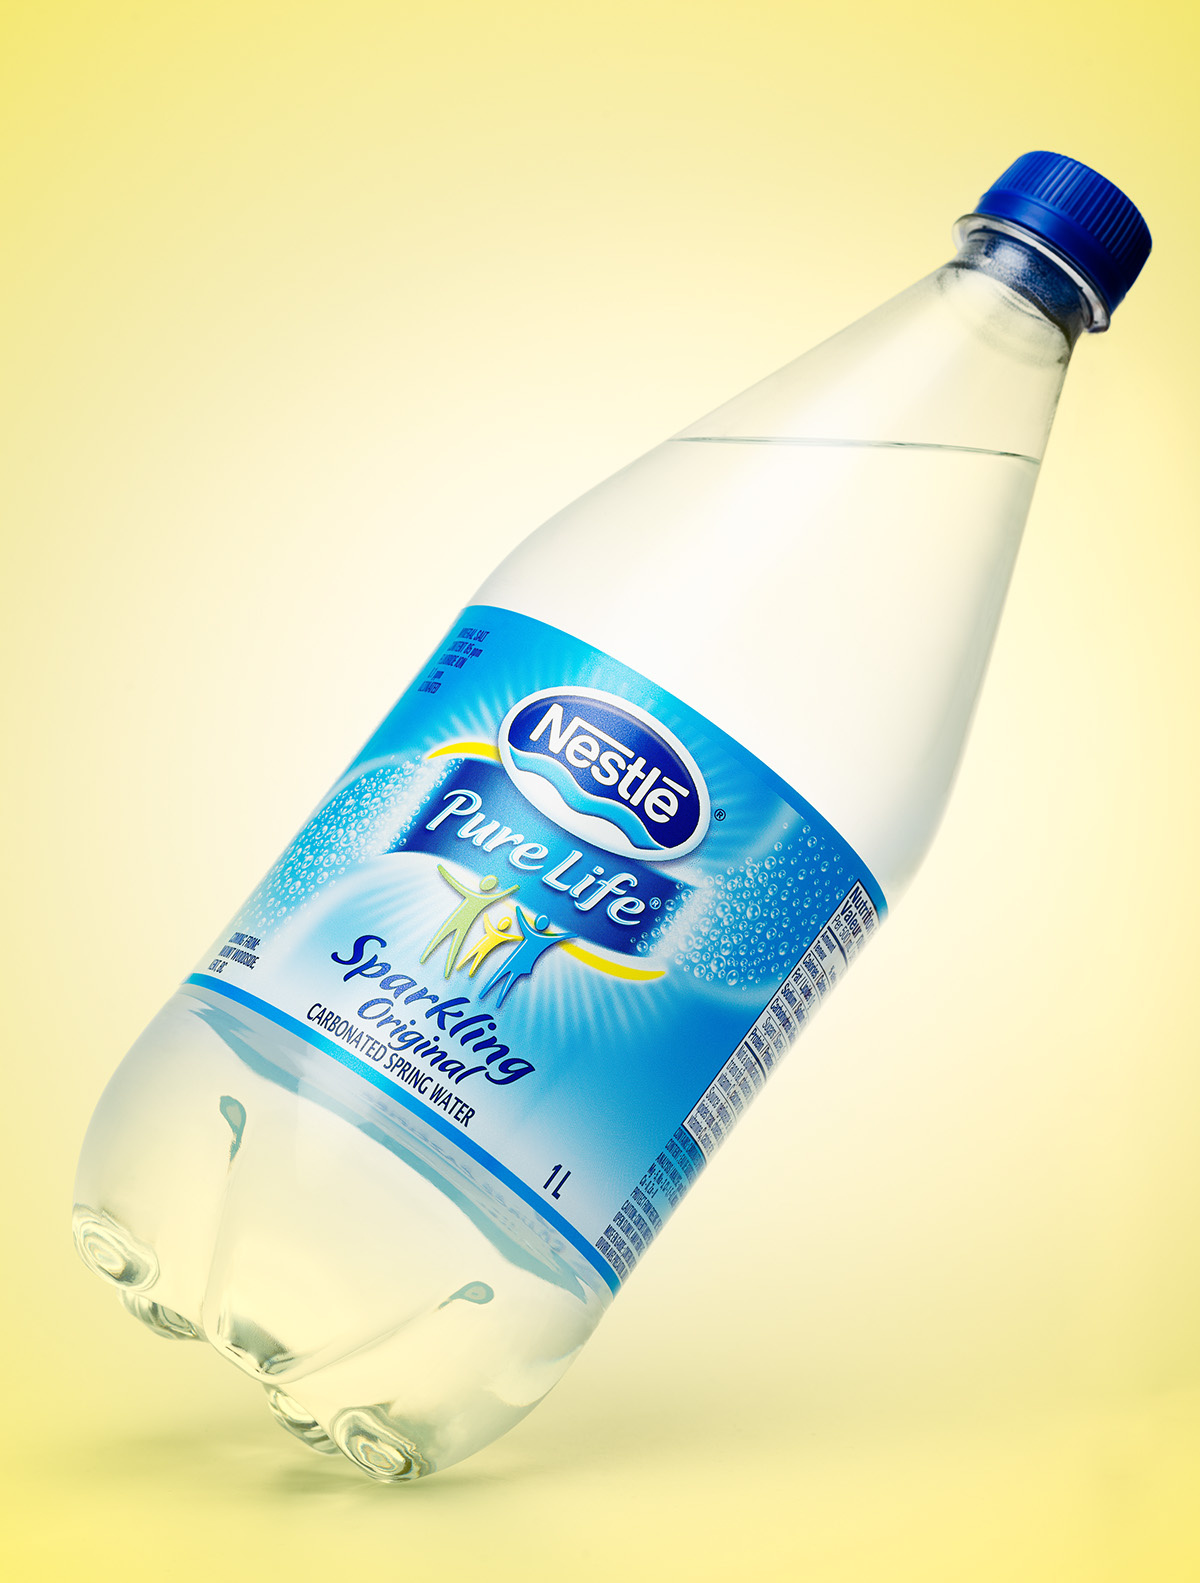 sparkling product Product Photography still life nestle bottles bottle water campaign creative